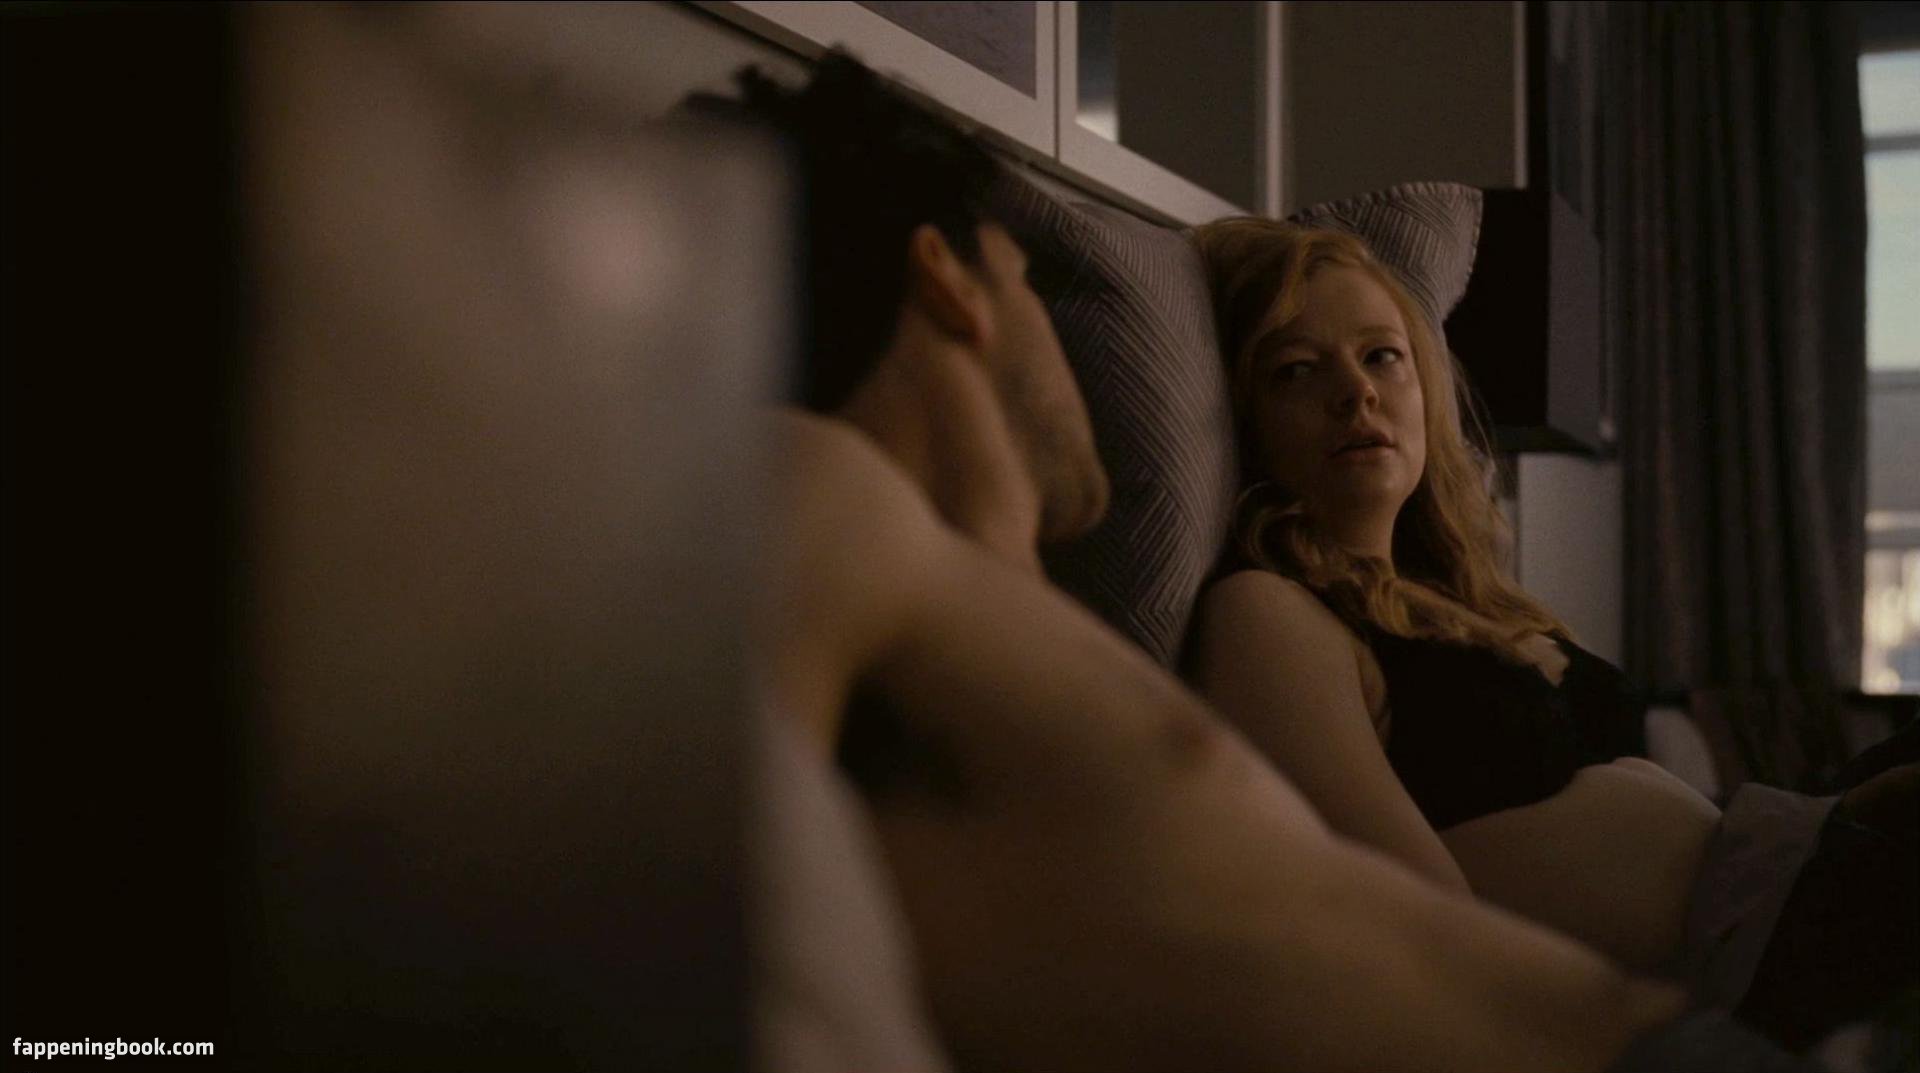 Sarah Snook Nude, The Fappening - Photo #483598 - FappeningBook.